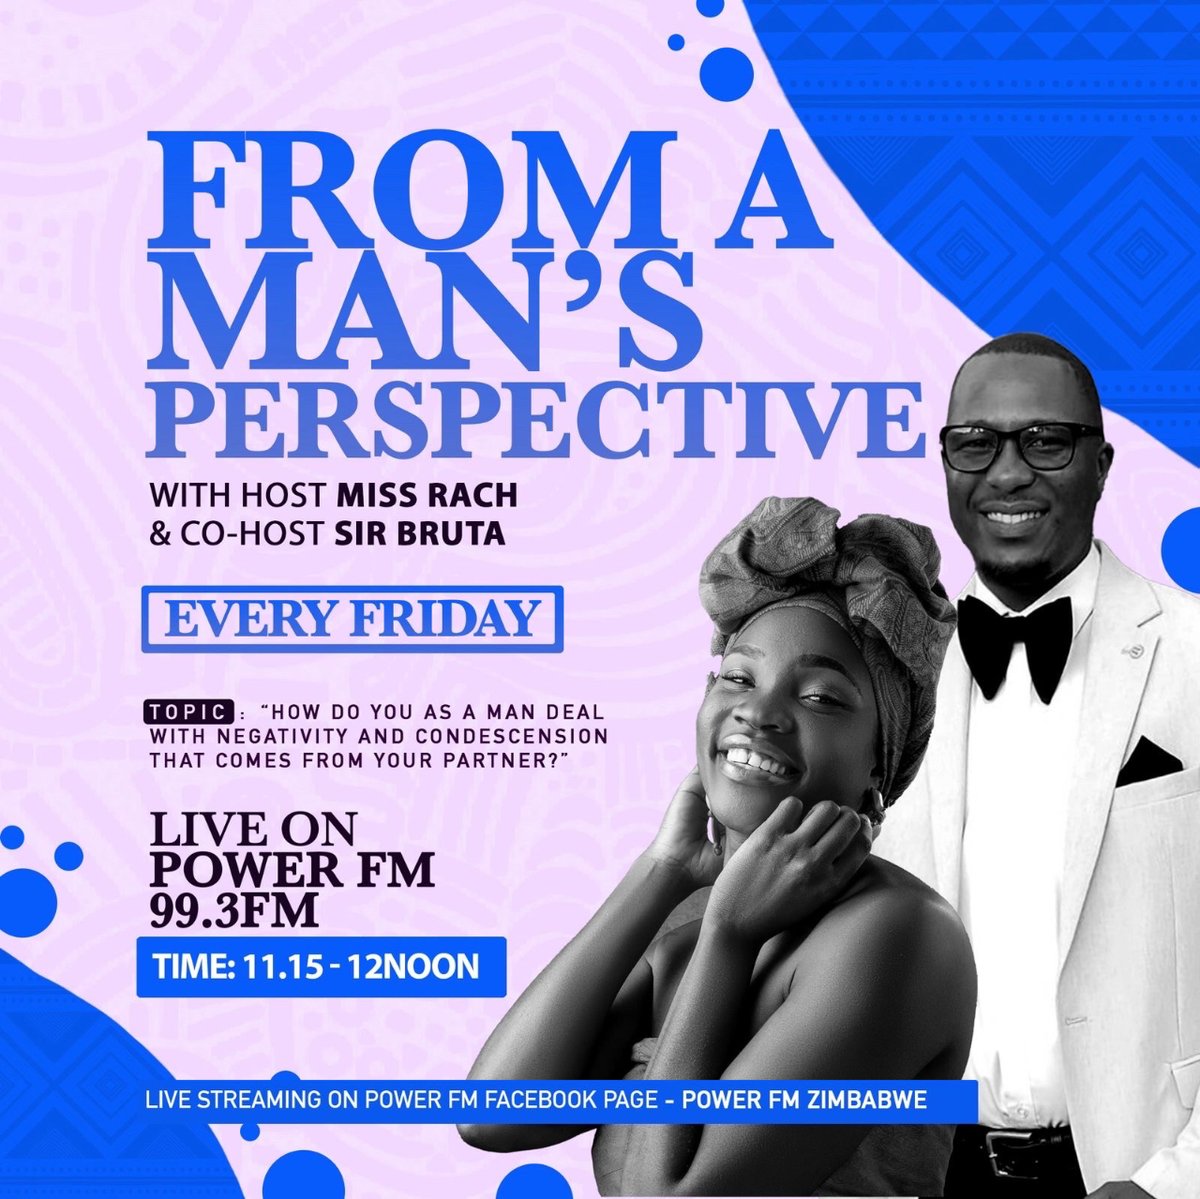 🎙️ Tune in to Power FM’s Connexion with Miss Rach and Sir Bruta as they dive into a thought-provoking discussion: How does criticism from your partner impact men? Share your thoughts and join the conversation! #RelationshipTalk #HonestyIsKey